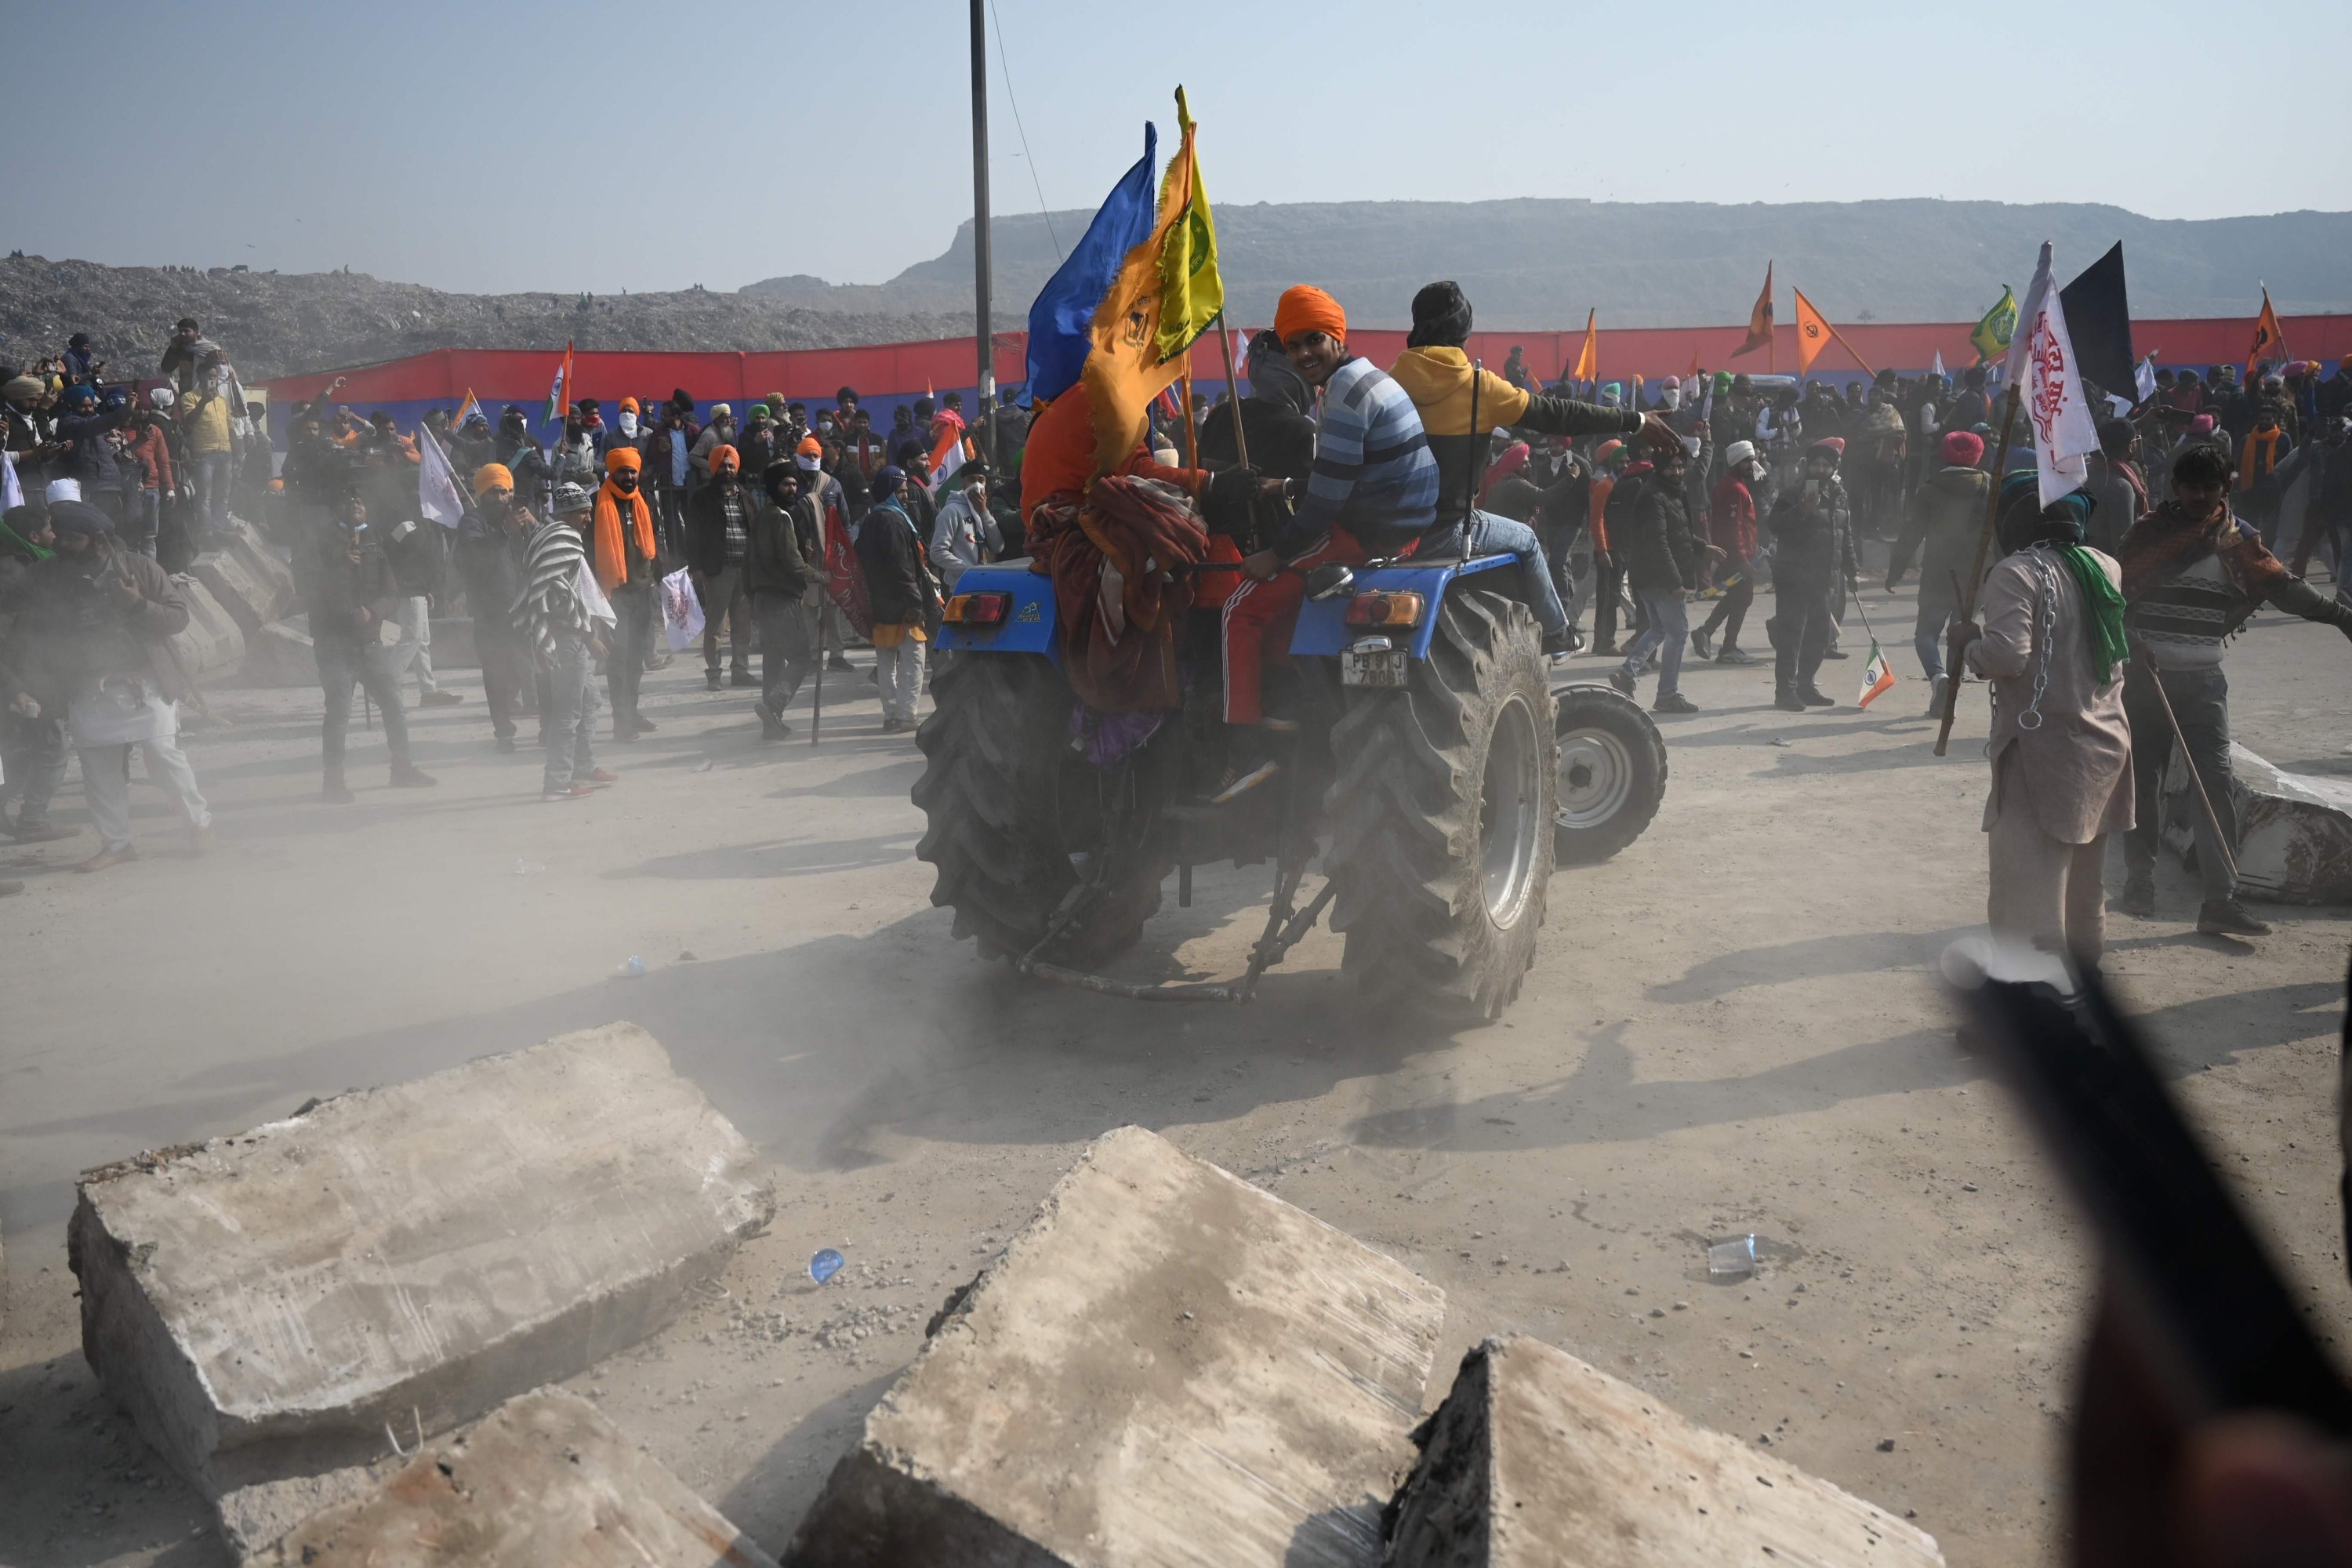 Farmers on a tractor prepare to remove concrete barricades installed by police during a rally against the central government's recent agricultural reforms in New Delhi, India, Jan. 26, 2021. (AFP Photo)